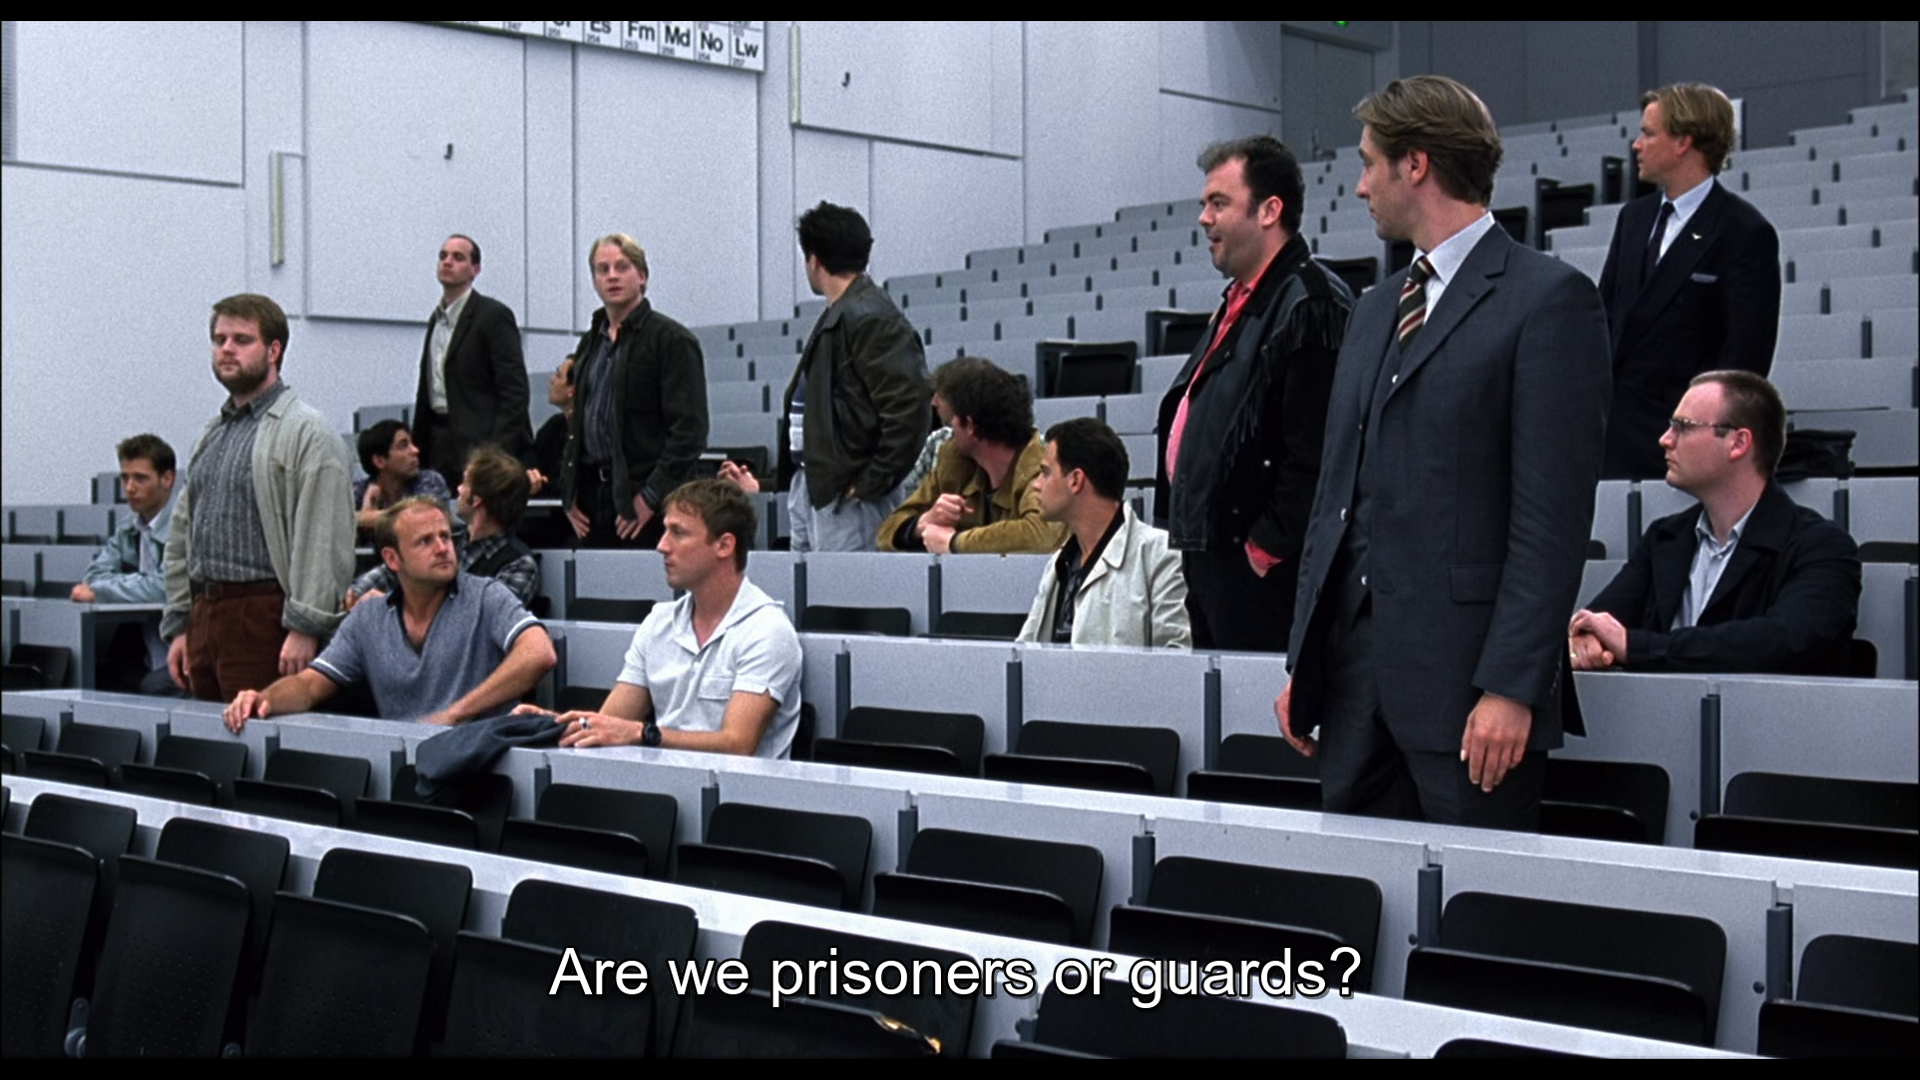 A scene between inmates and guards (from the movie The Experiment)